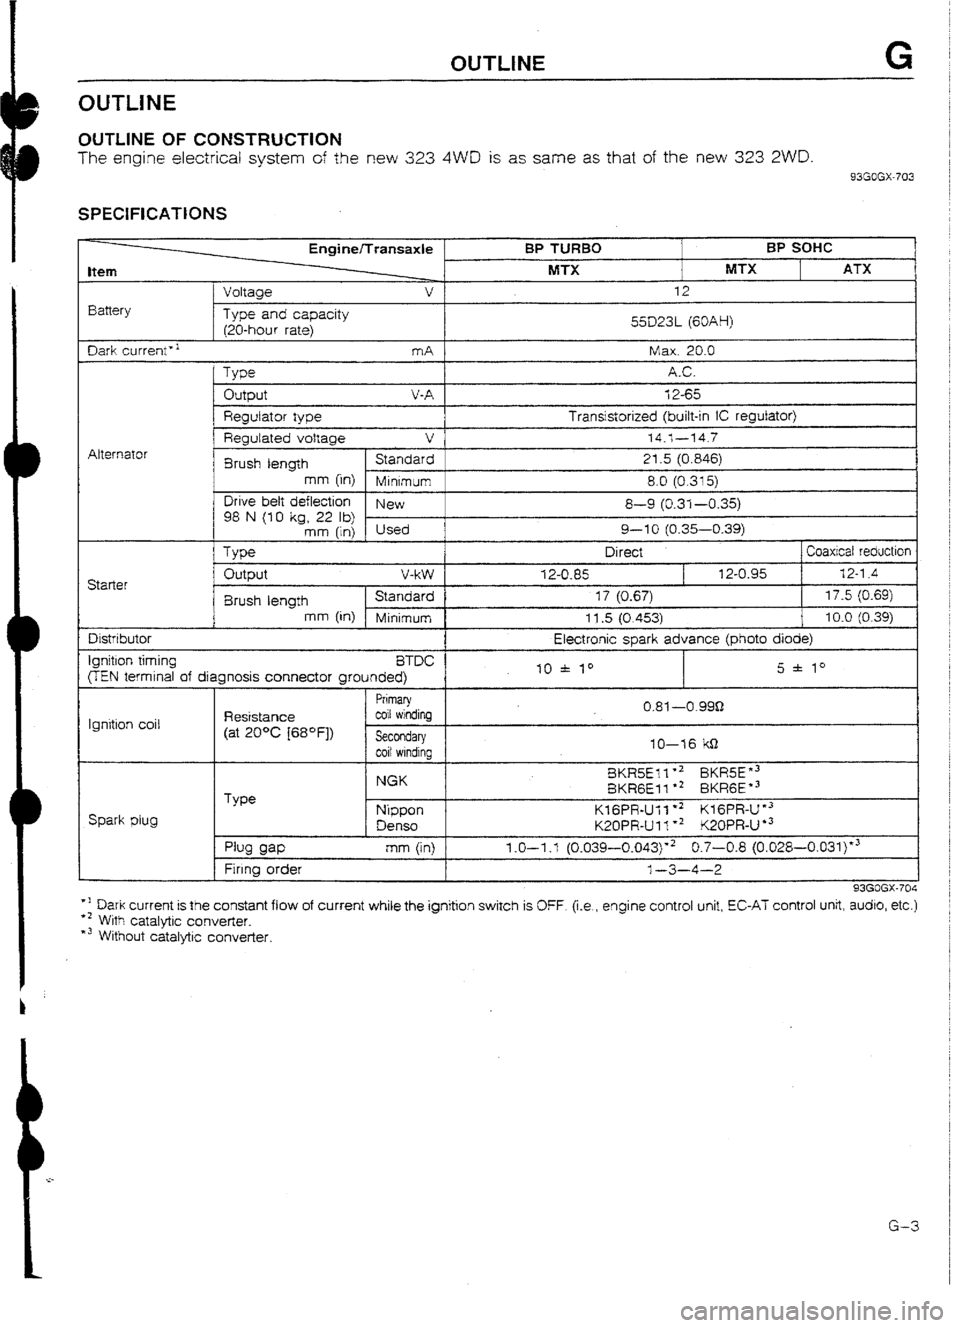 MAZDA 232 1990  Workshop Manual Suplement OUTLINE G 
L 
i i- 
OUTLINE 
OUTLINE OF CONSTRUCTION 
The engine electrical system of the new 323 4WD is as same as that of the new 323 ZWD. 
93GOGX-703 
SPECIFICATIONS 
Item 
Battery t 
Voltaae Engin